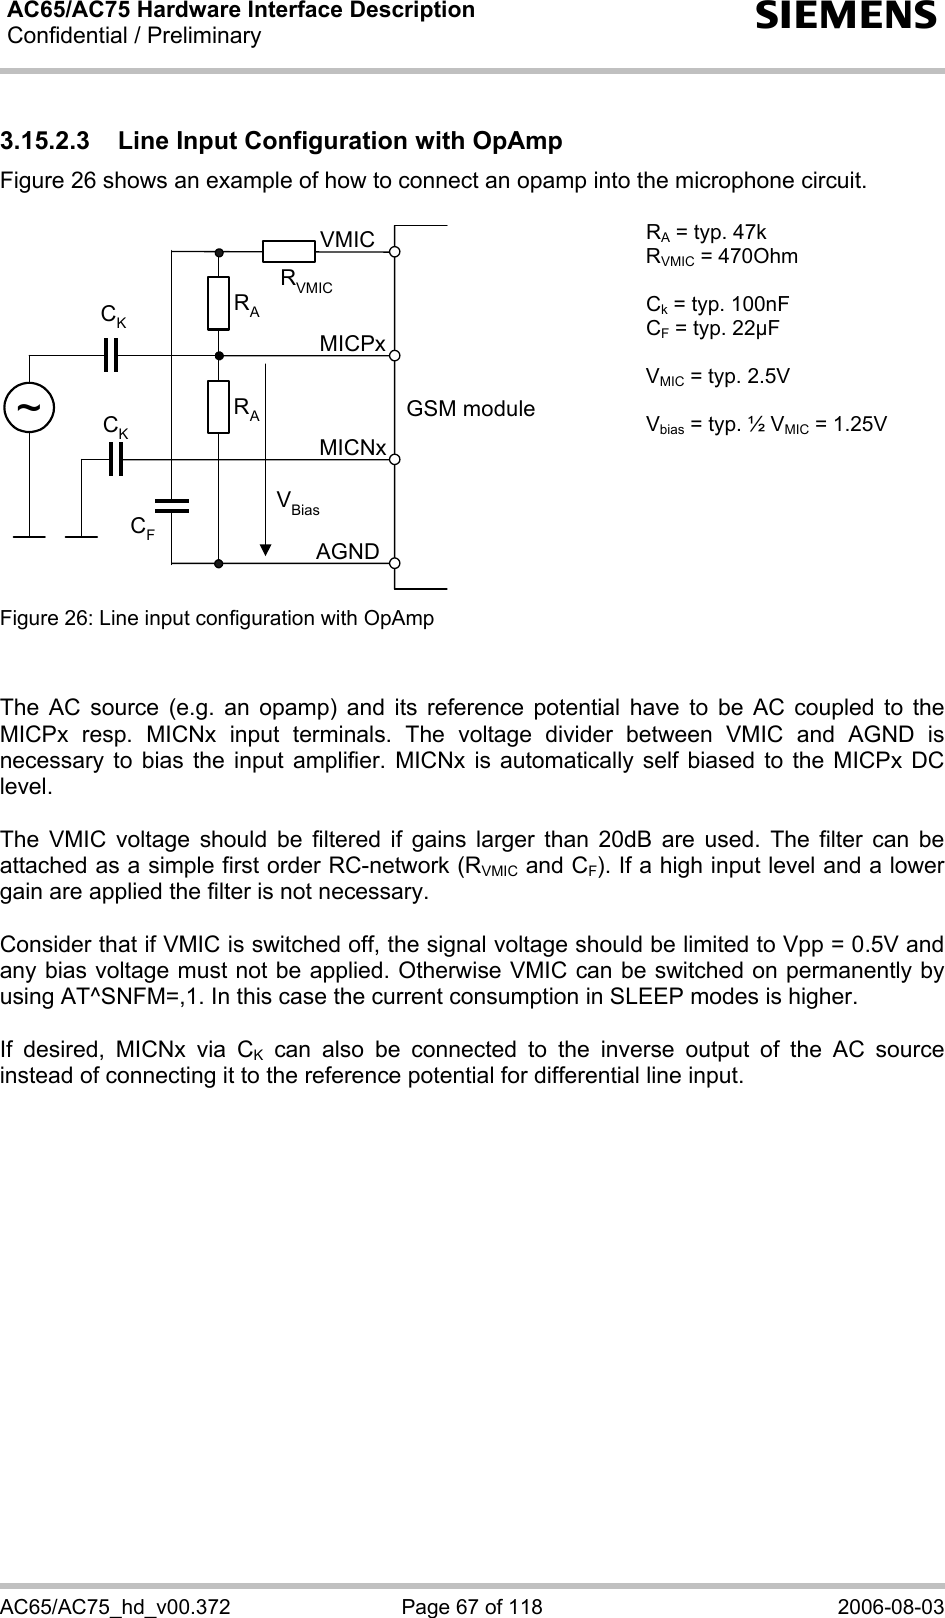 AC65/AC75 Hardware Interface Description Confidential / Preliminary   s AC65/AC75_hd_v00.372  Page 67 of 118  2006-08-03 3.15.2.3  Line Input Configuration with OpAmp Figure 26 shows an example of how to connect an opamp into the microphone circuit.  GSM moduleRAVBiasCKAGNDMICNxMICPxVMICRACK~RVMICCF RA = typ. 47k RVMIC = 470Ohm  Ck = typ. 100nF CF = typ. 22µF  VMIC = typ. 2.5V  Vbias = typ. ½ VMIC = 1.25V Figure 26: Line input configuration with OpAmp     The AC source (e.g. an opamp) and its reference potential have to be AC coupled to the MICPx resp. MICNx input terminals. The voltage divider between VMIC and AGND is necessary to bias the input amplifier. MICNx is automatically self biased to the MICPx DC level.   The VMIC voltage should be filtered if gains larger than 20dB are used. The filter can be attached as a simple first order RC-network (RVMIC and CF). If a high input level and a lower gain are applied the filter is not necessary.  Consider that if VMIC is switched off, the signal voltage should be limited to Vpp = 0.5V and any bias voltage must not be applied. Otherwise VMIC can be switched on permanently by using AT^SNFM=,1. In this case the current consumption in SLEEP modes is higher.  If desired, MICNx via CK can also be connected to the inverse output of the AC source instead of connecting it to the reference potential for differential line input.    